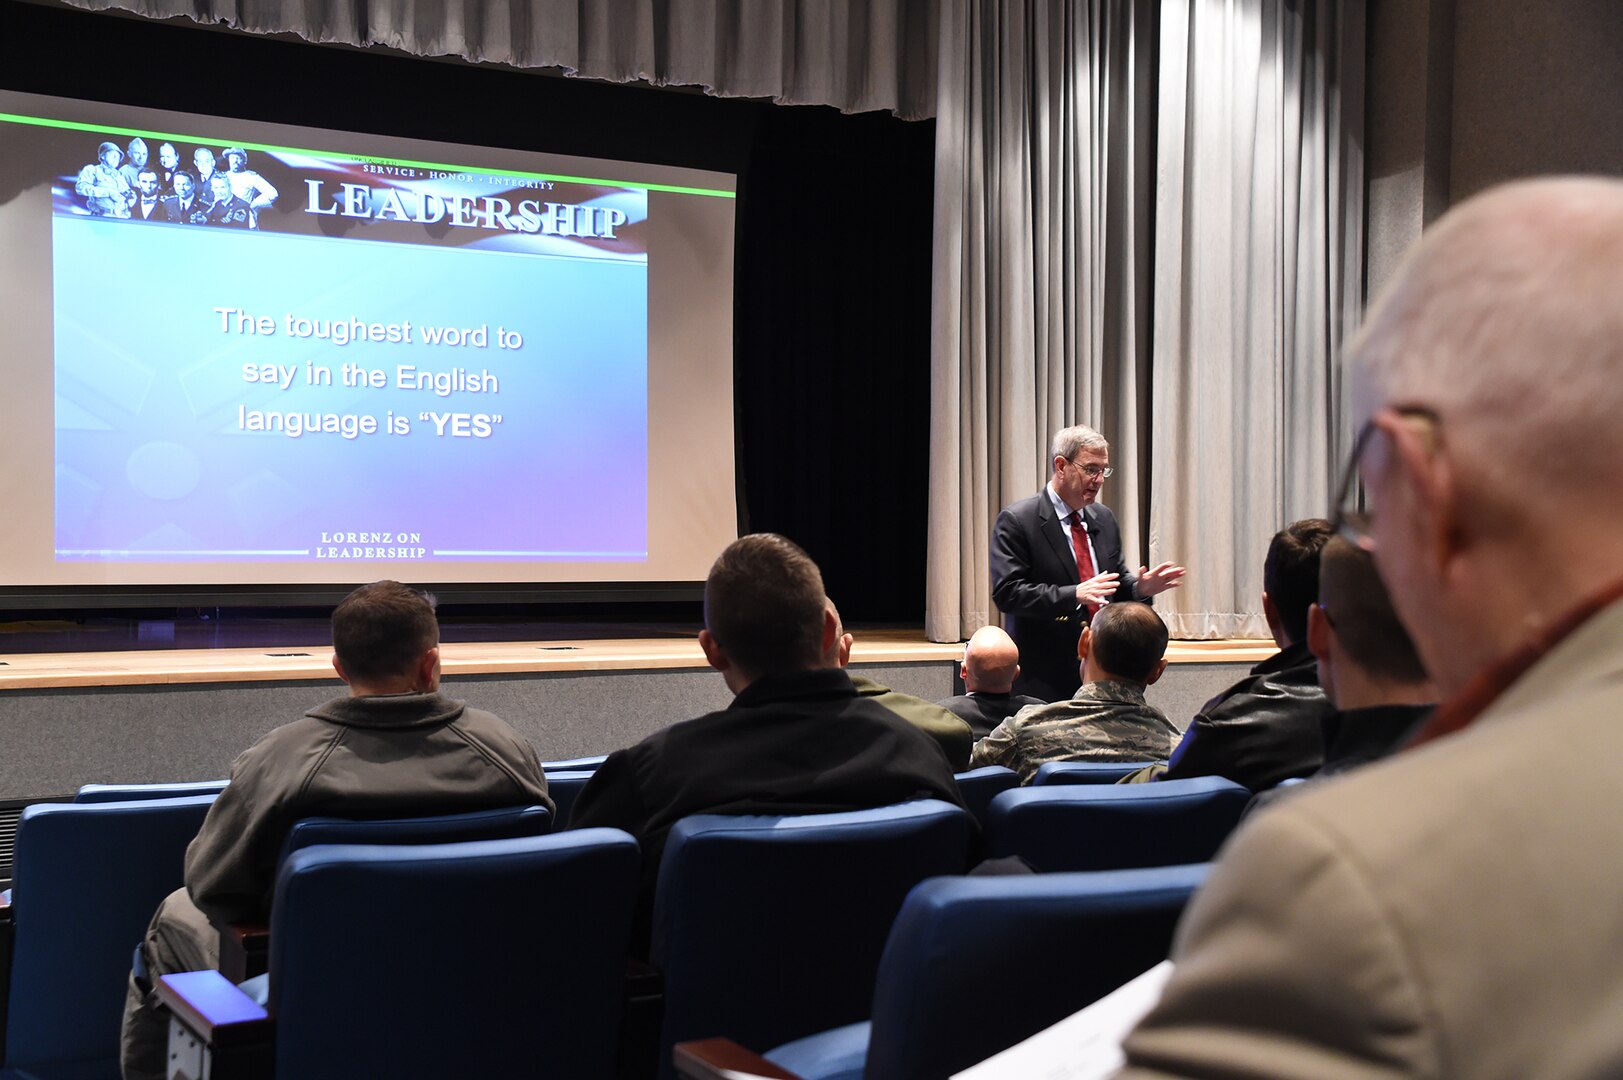 Retired U.S. Air Force Gen. Stephen Lorenz shares his perspective on leadership with members of U.S. Strategic Command during his visit to Offutt Air Force Base, Neb., Nov. 6, 2017. Lorenz, who retired as commander of Air Education and Training Command, discussed the traits and practices of effective leaders based on his experience as a military officer and commander.